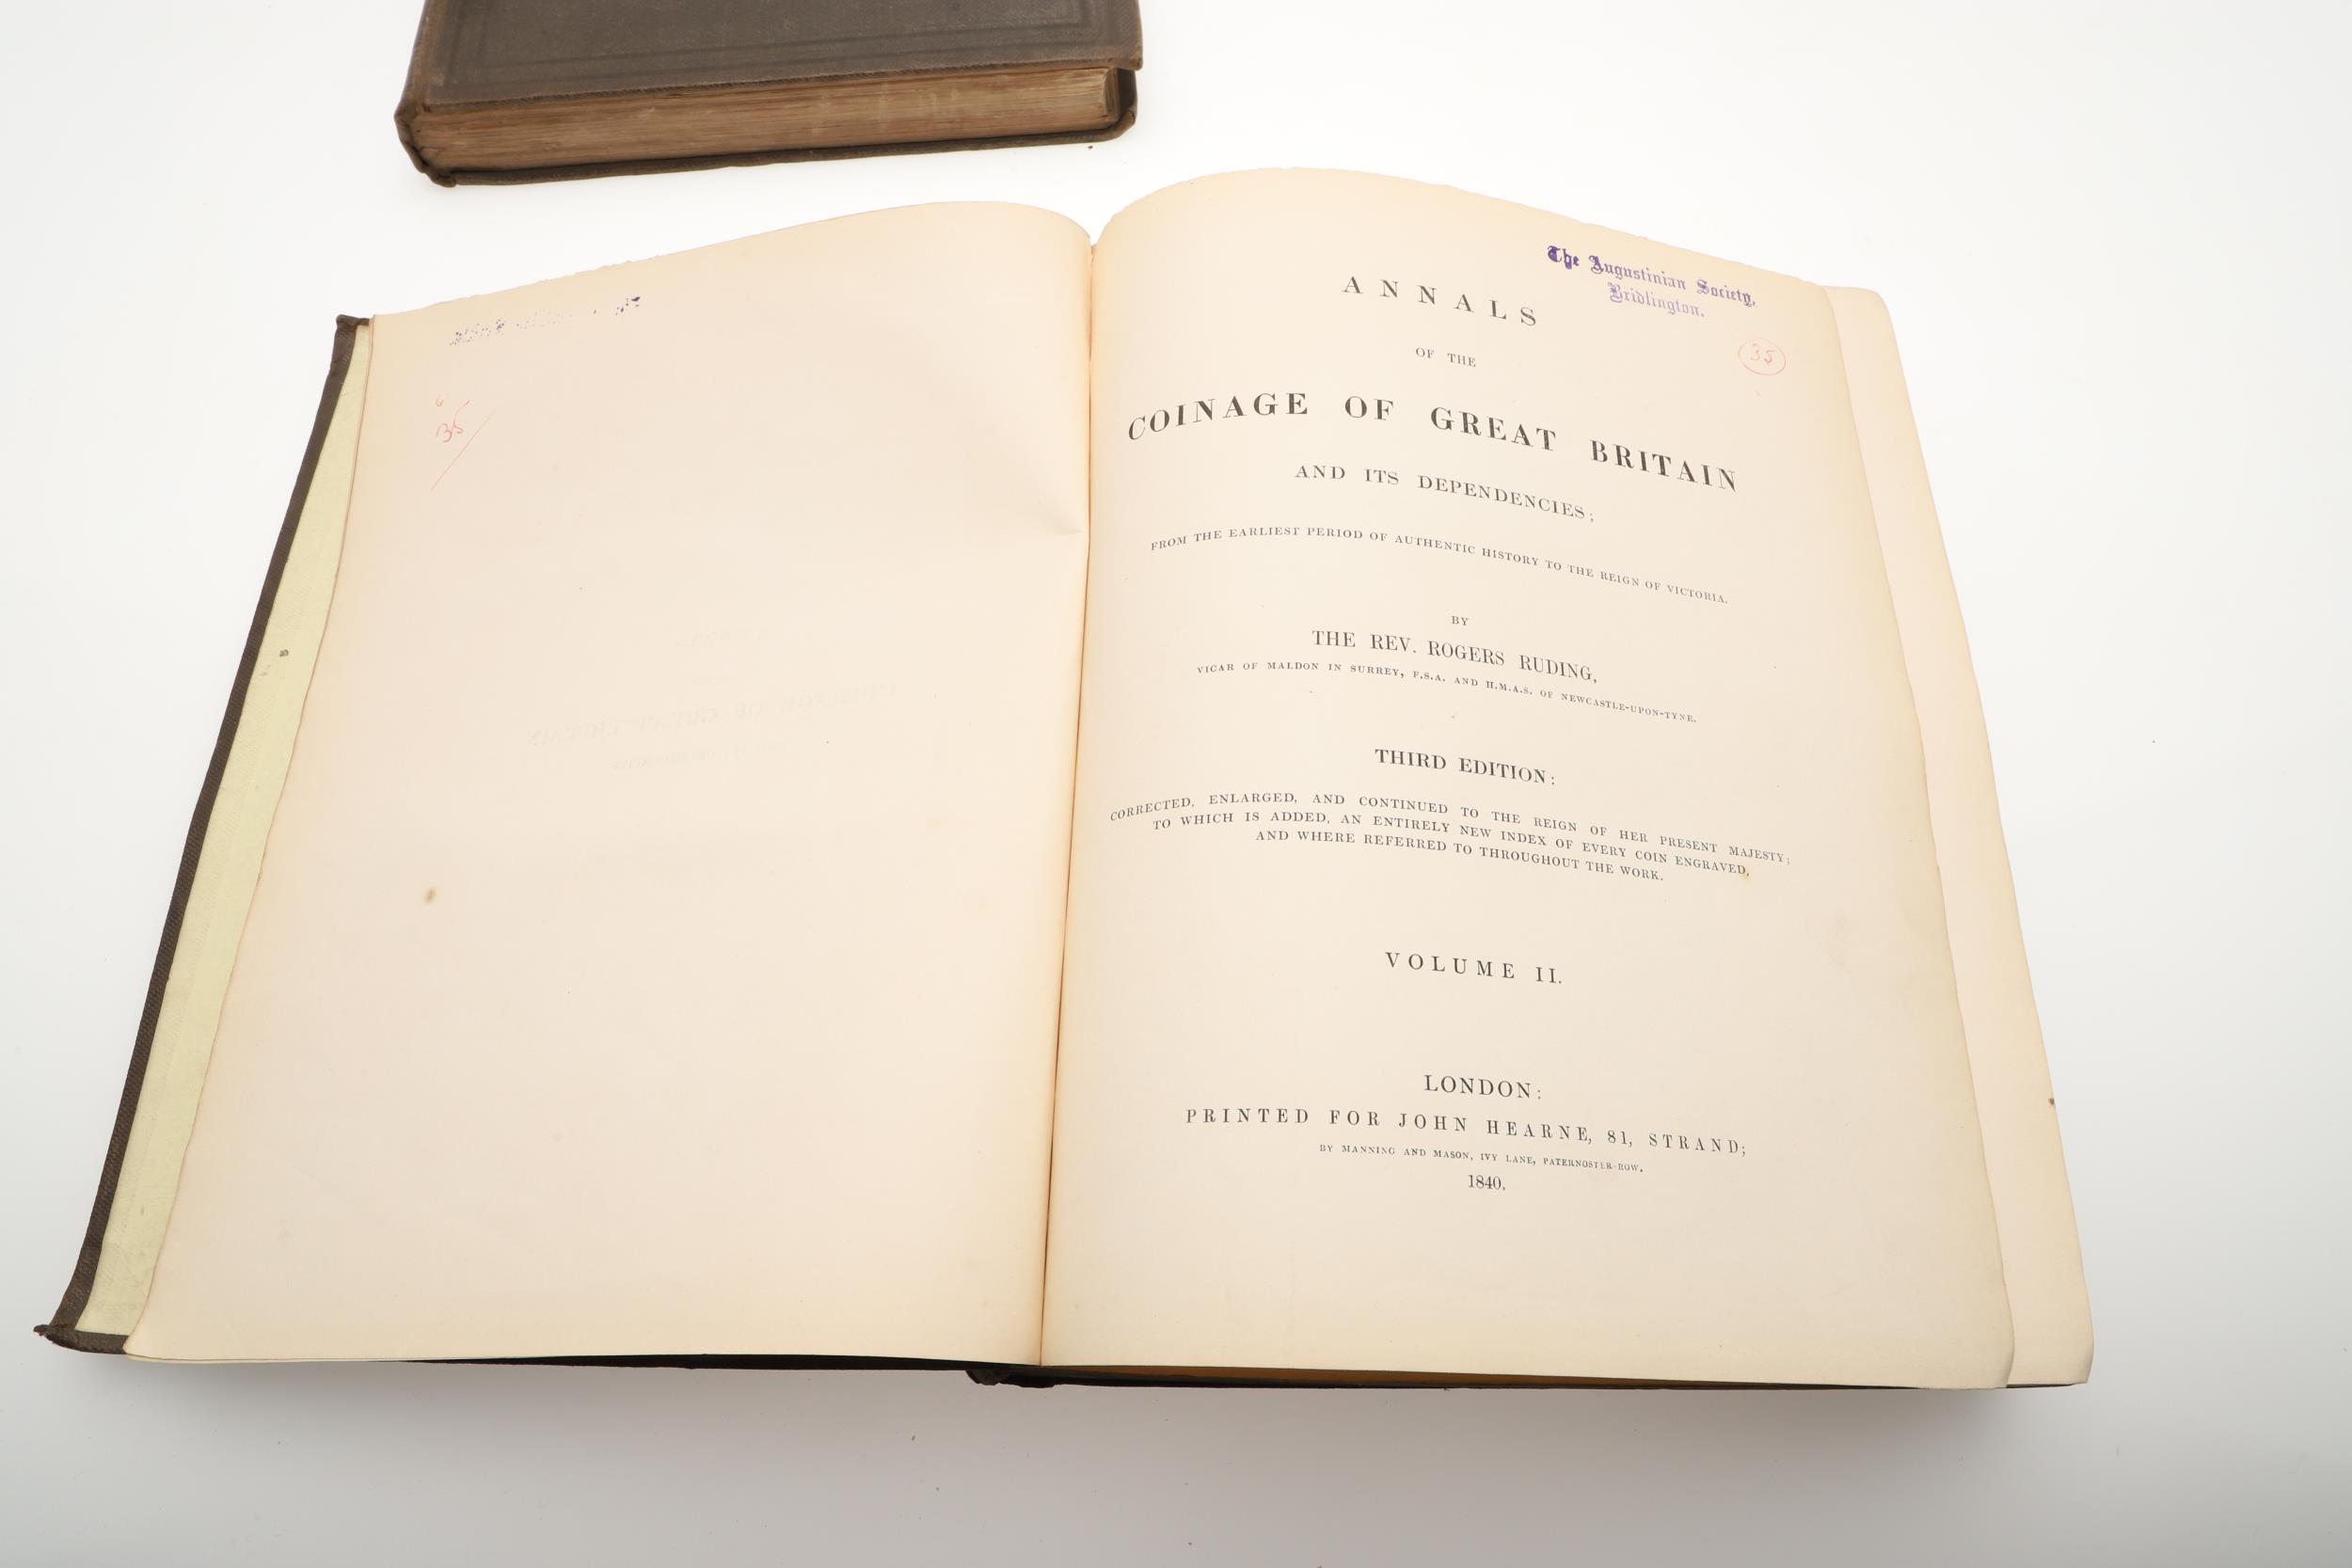 ANNALS OF THE COINAGE OF GREAT BRITAIN, 1840, THE REV. ROGERS RUDING. 3 VOLUMES. - Image 8 of 10